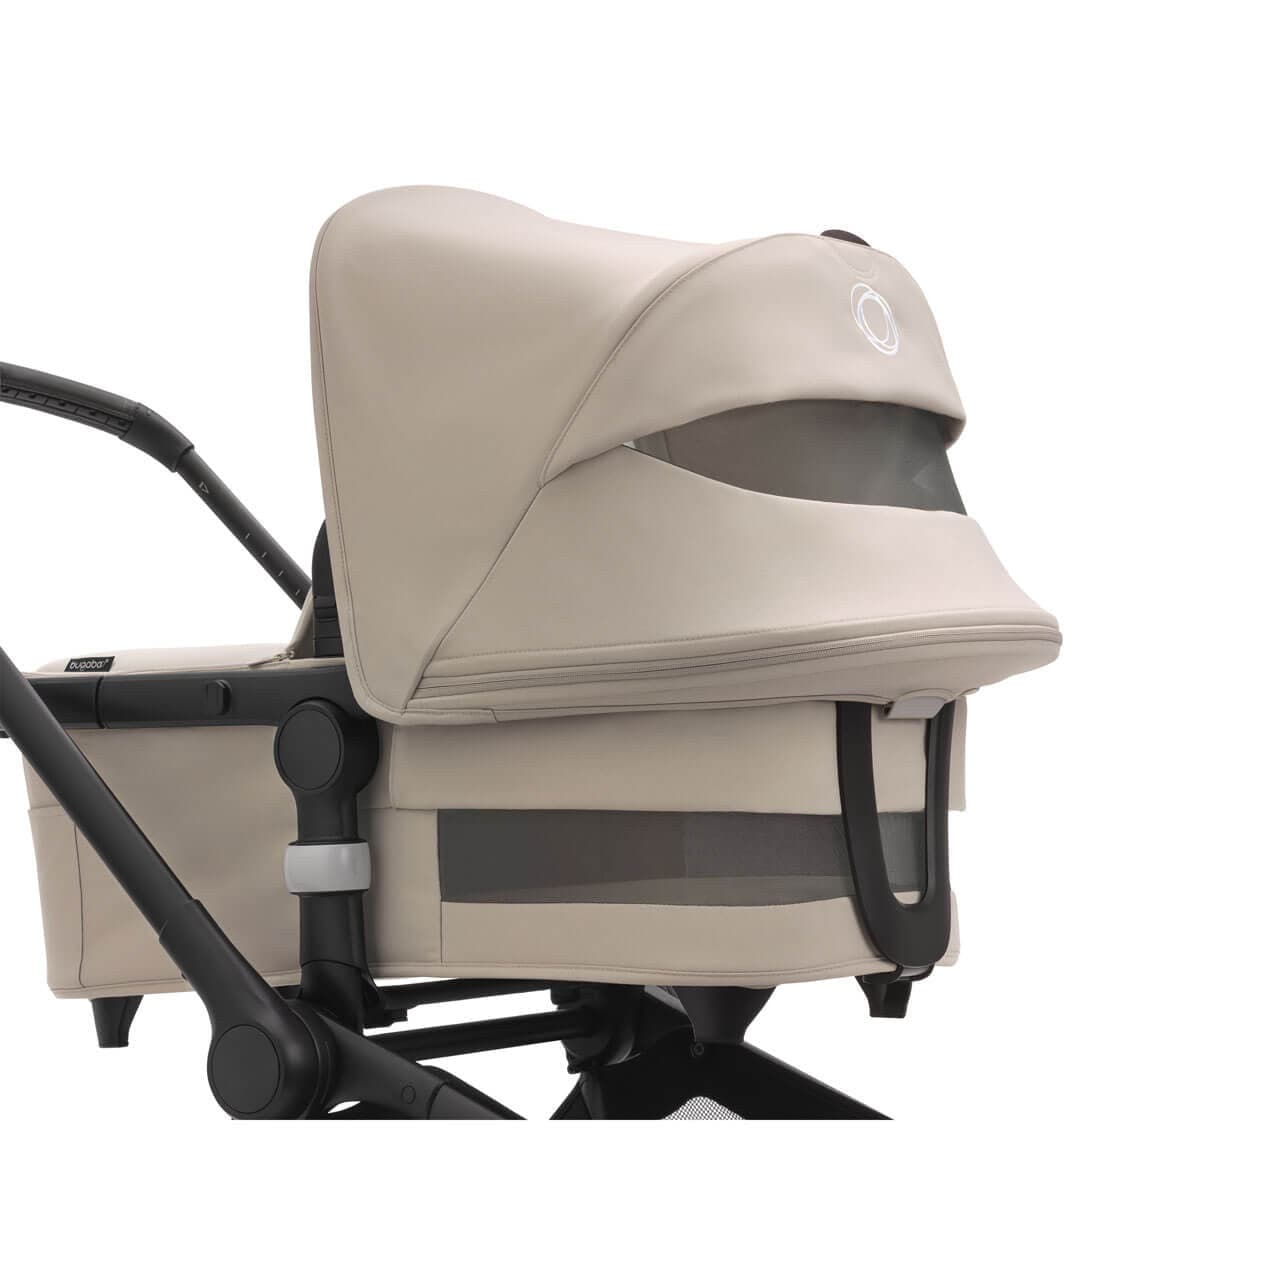 Bugaboo Fox 5 Ultimate Travel System Bundle - Black/Desert Taupe - For Your Little One